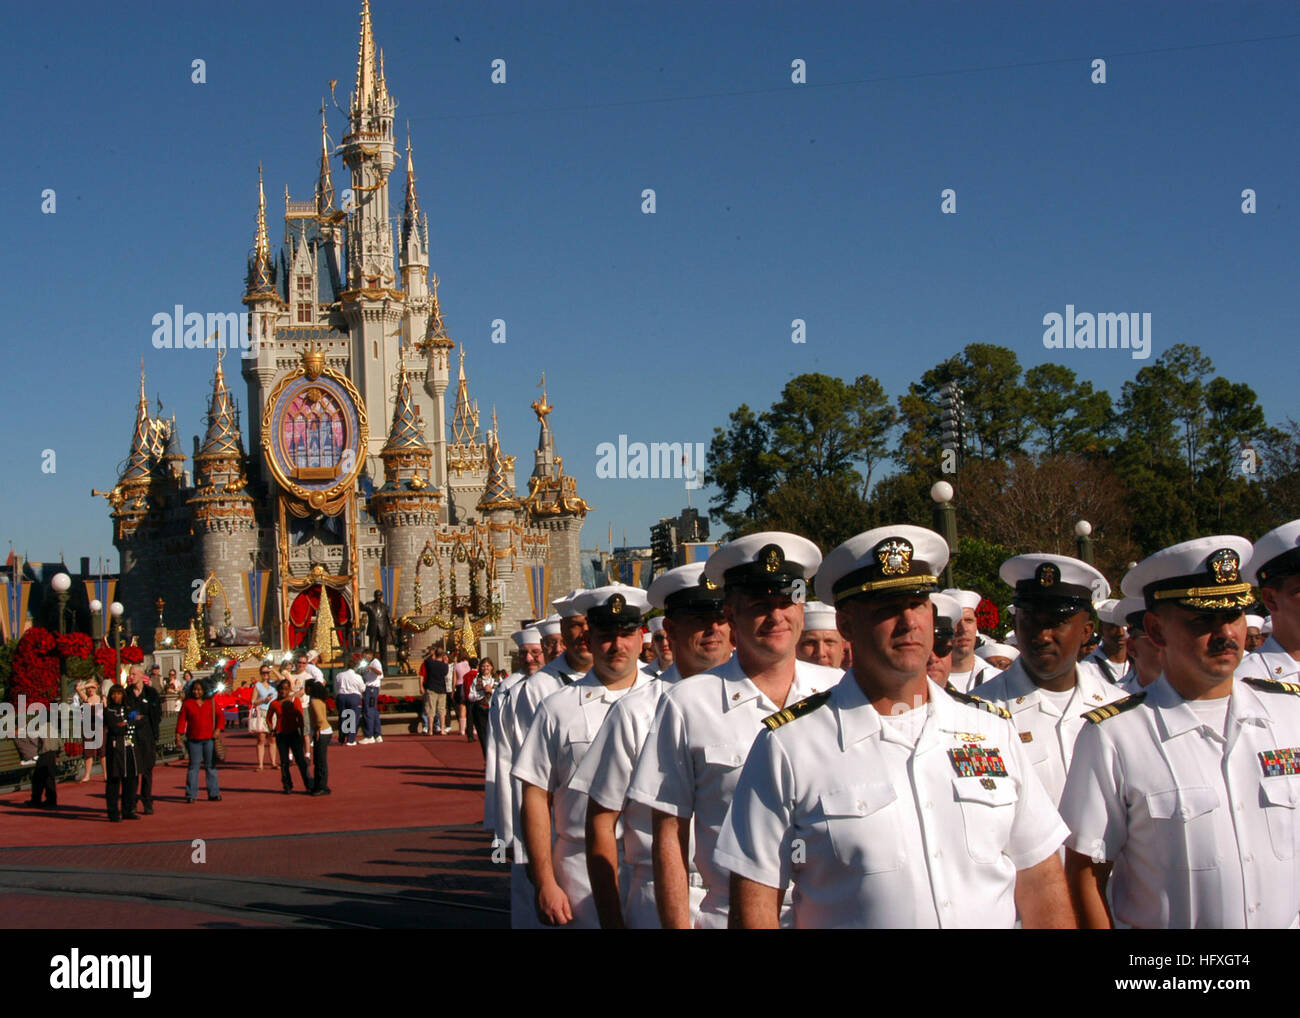 051204-N-6645H-092 Orlando, Fla. (Dec. 4, 2005) - Sailors from various U.S. Navy commands throughout Navy's Southeast Region march before Cinderella's Castle before entering onto Main St. inside Walt Disney World's Magic Kingdom. The Sailors were greeted by family members and guests and joined Disney World's Military Salute for its 2005 Christmas Day Parade taping. U.S. Navy photo by PhotographerÕs Mate 3rd Class Adam J. Herrada (RELEASED) US Navy 051204-N-6645H-092 Sailors from various U.S. Navy commands throughout Navy's Southeast Region march before Cinderella's Castle before entering onto  Stock Photo